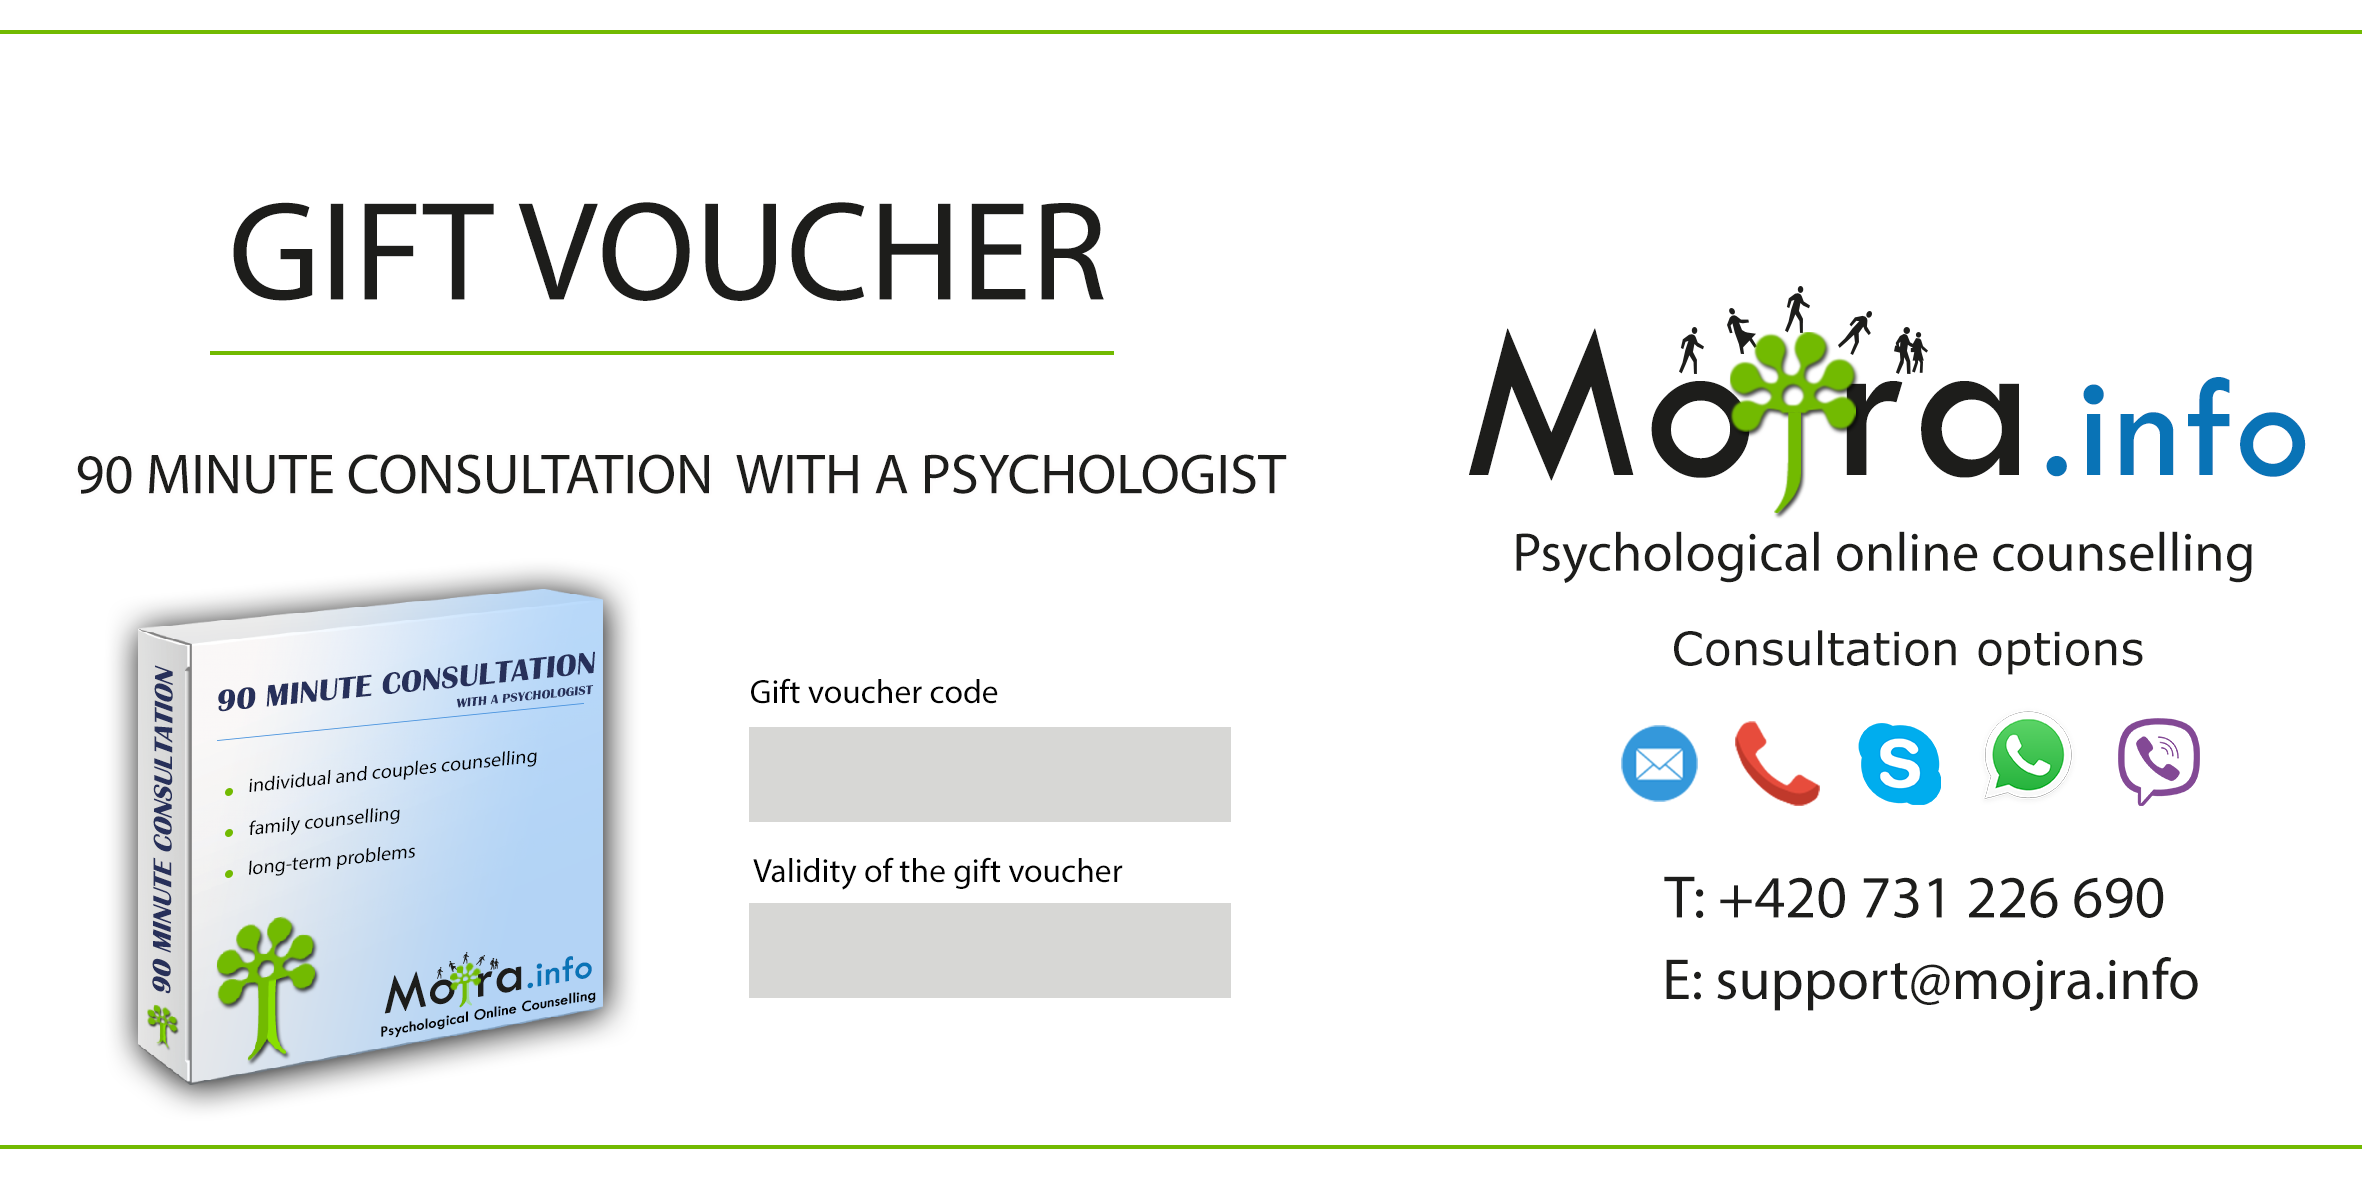 Gift Voucher: 90 minute consultation with a psychologist